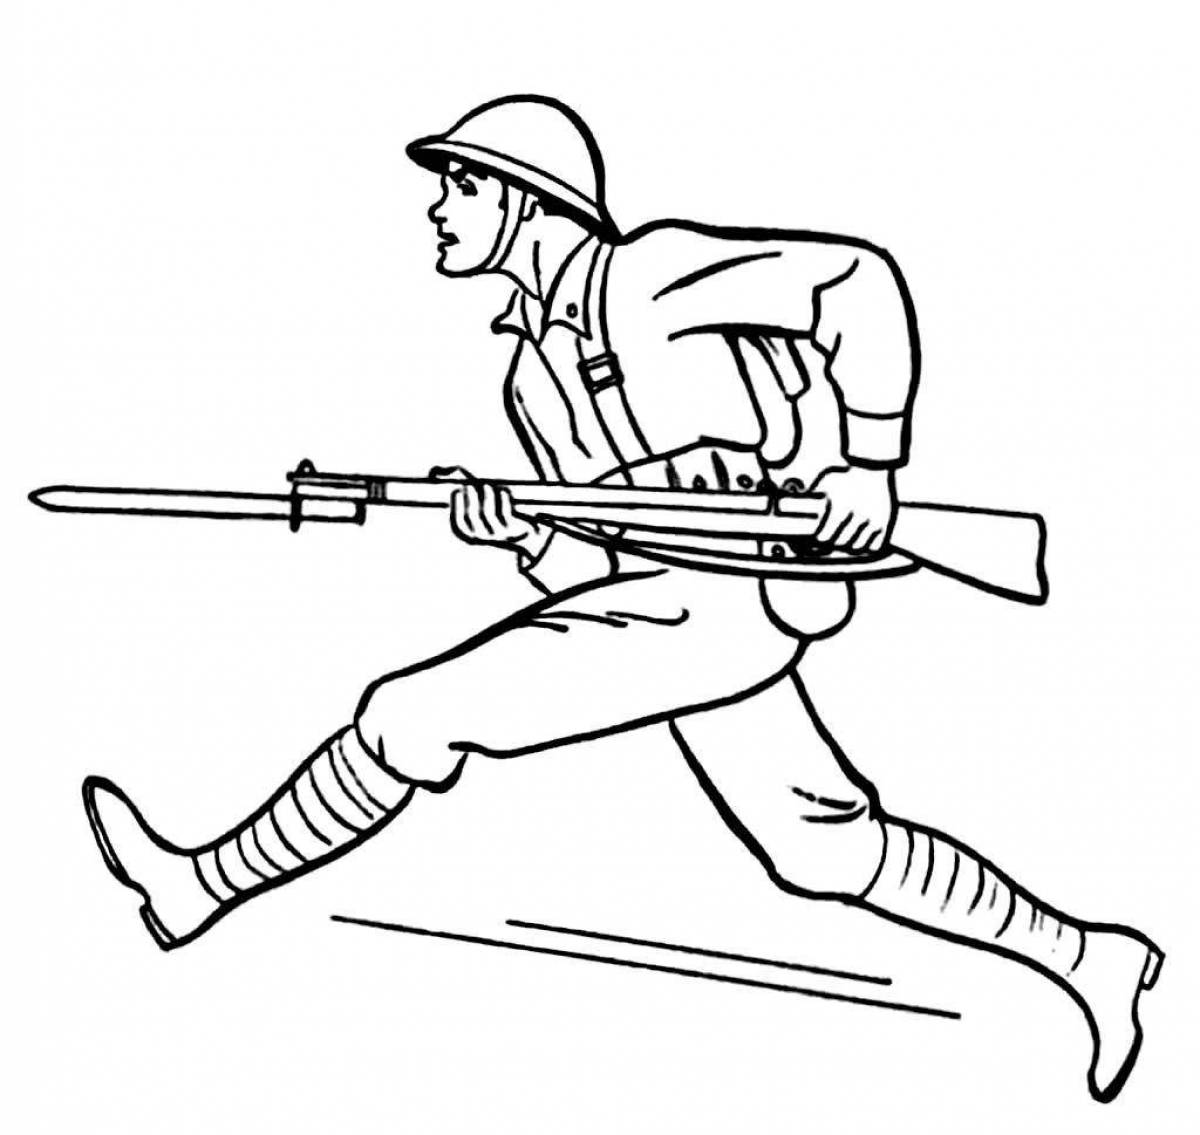 Courageous soldiers coloring pages for kids